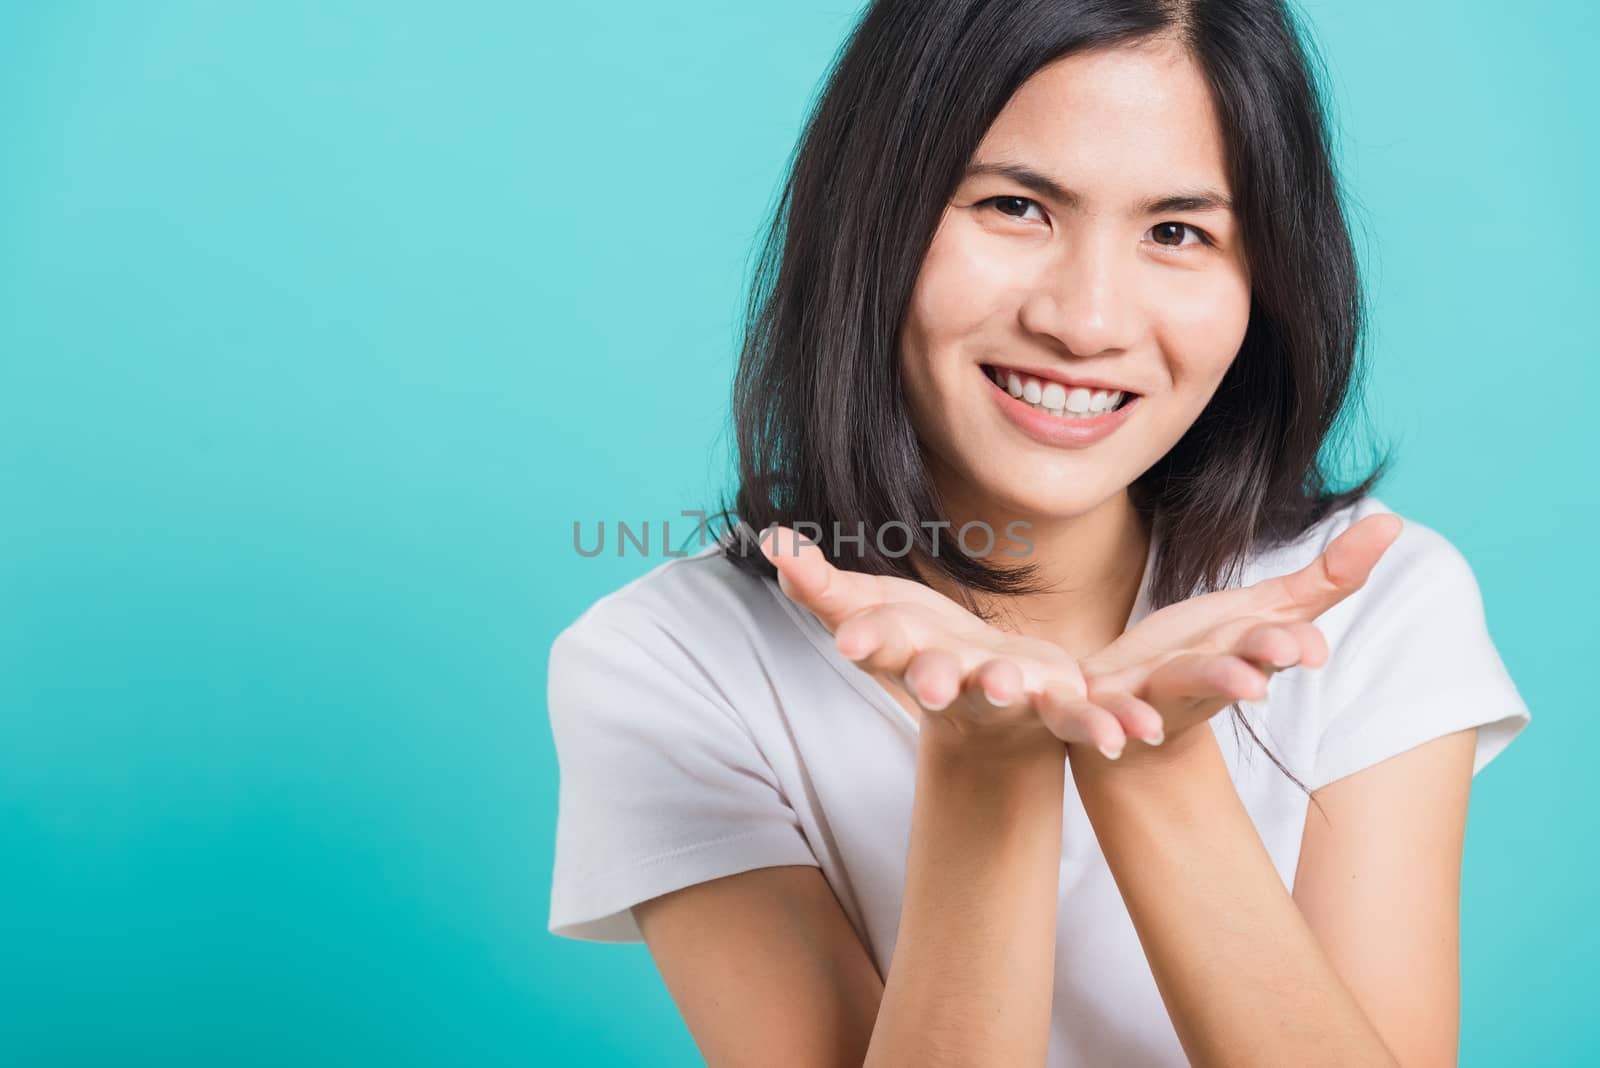 Portrait happy Asian beautiful young woman smile standing wear a white t-shirt, She blowing air kiss something on palms, studio shot on blue background with copy space for text